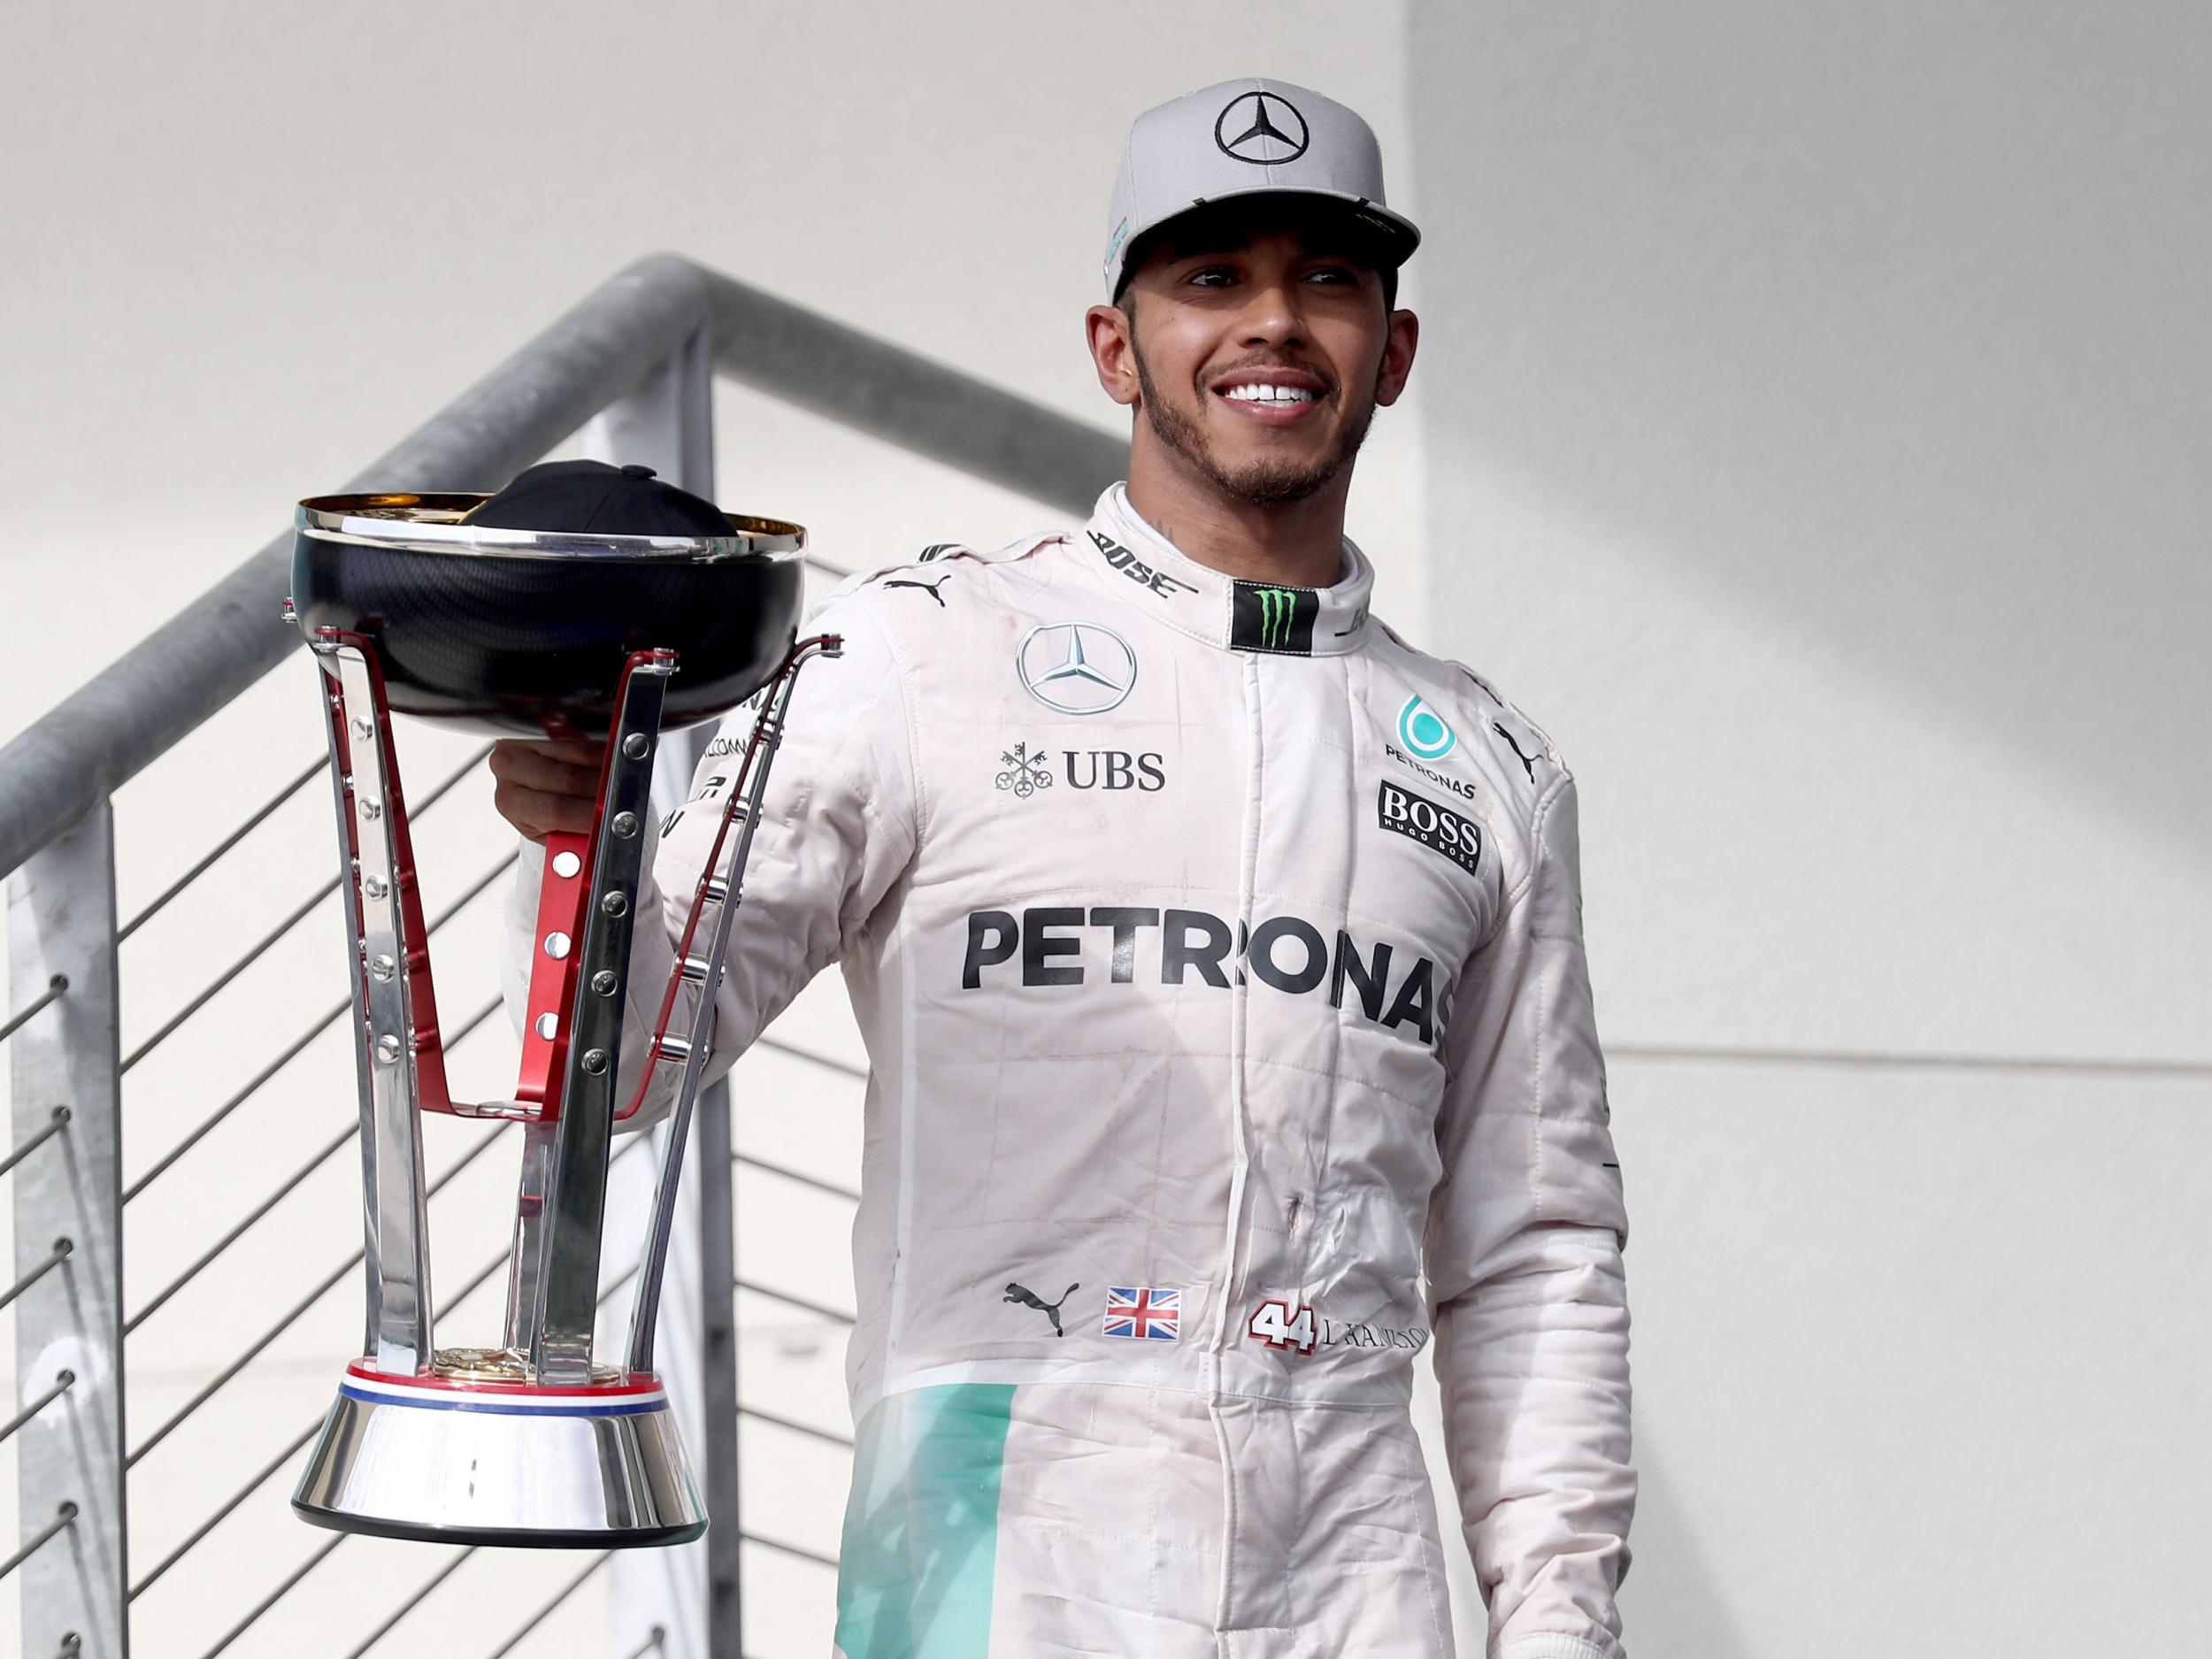 Hamilton led from start to finish at the Circuit of the Americas